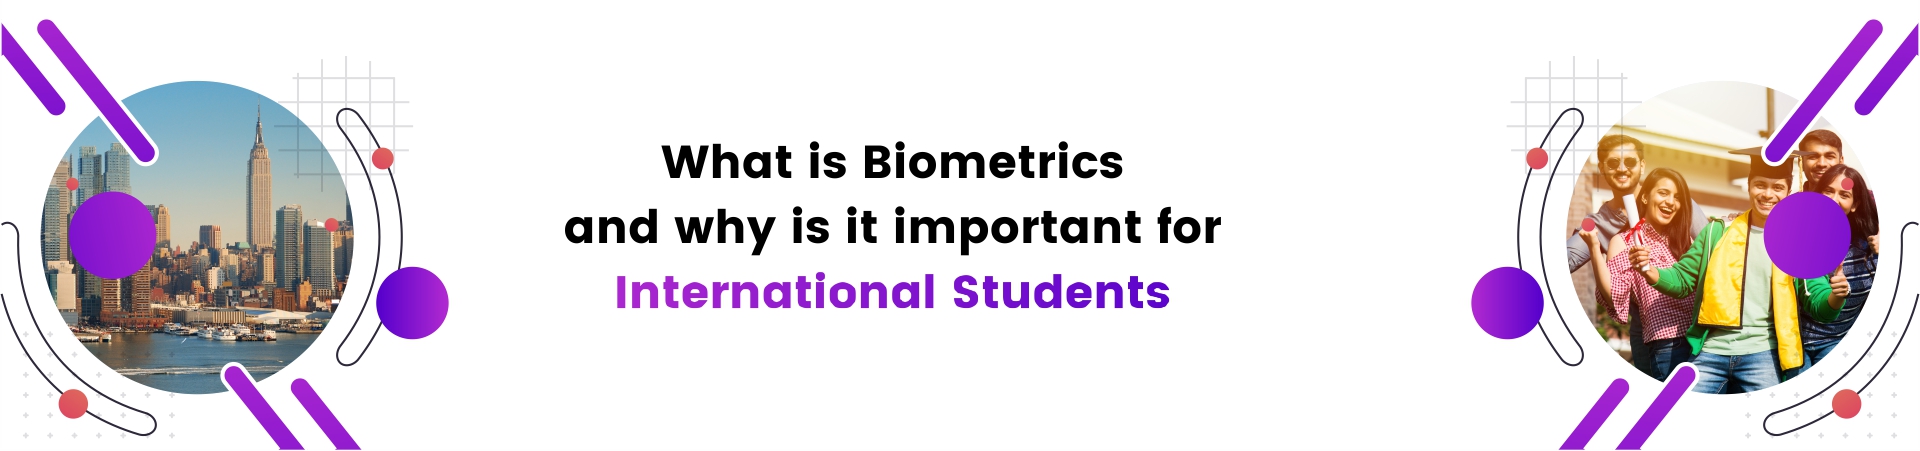 What is Biometrics and why is it important for International Students?